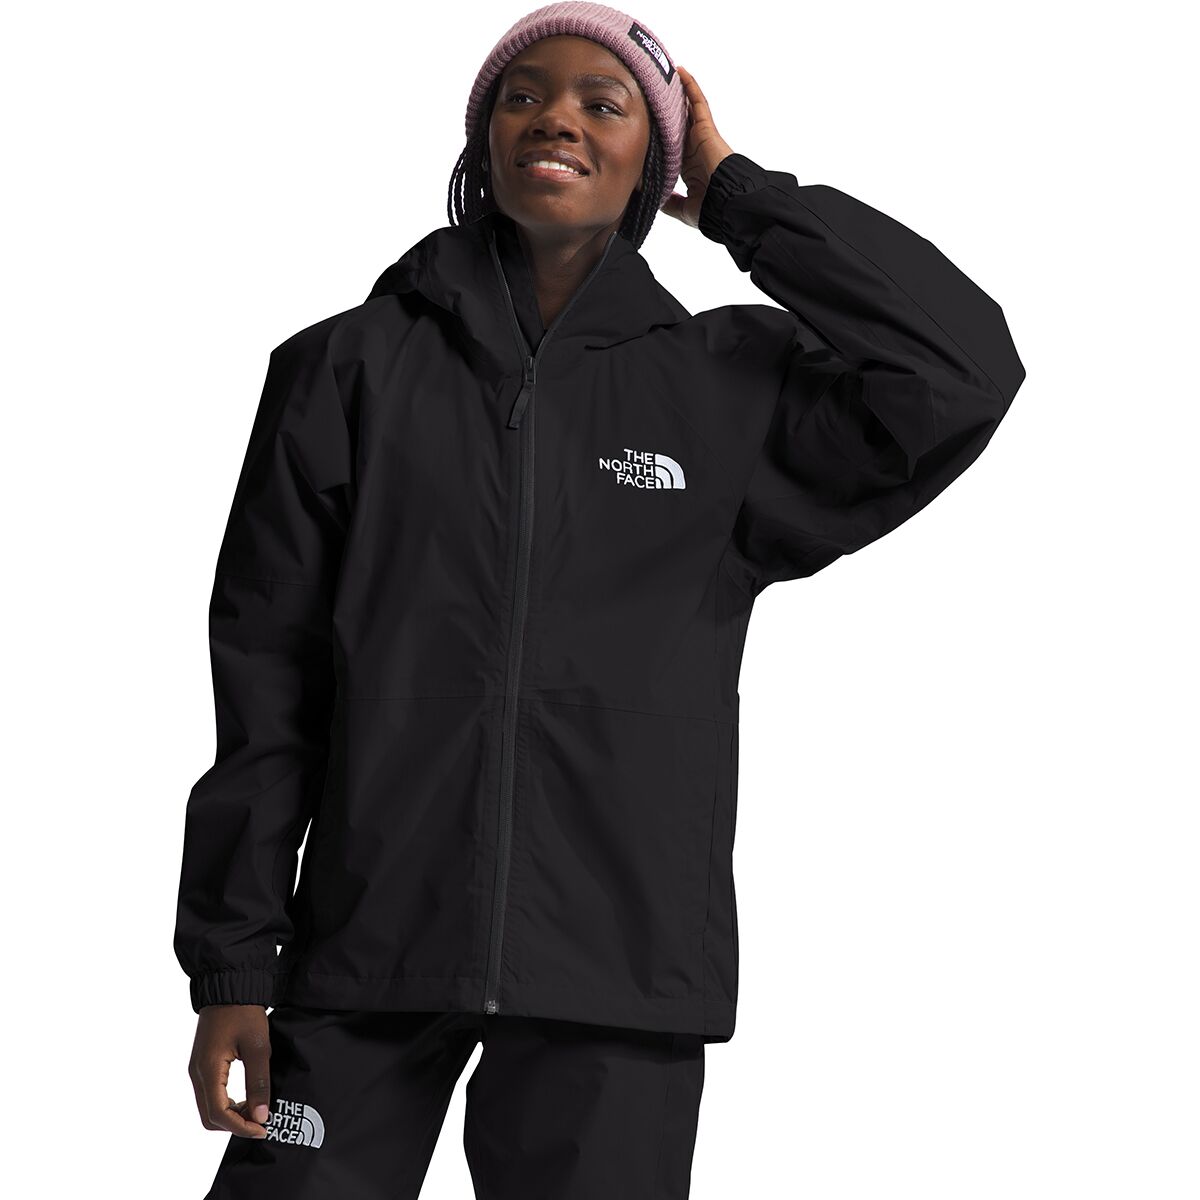 The North Face Build Up Jacket - Women's TNF Black